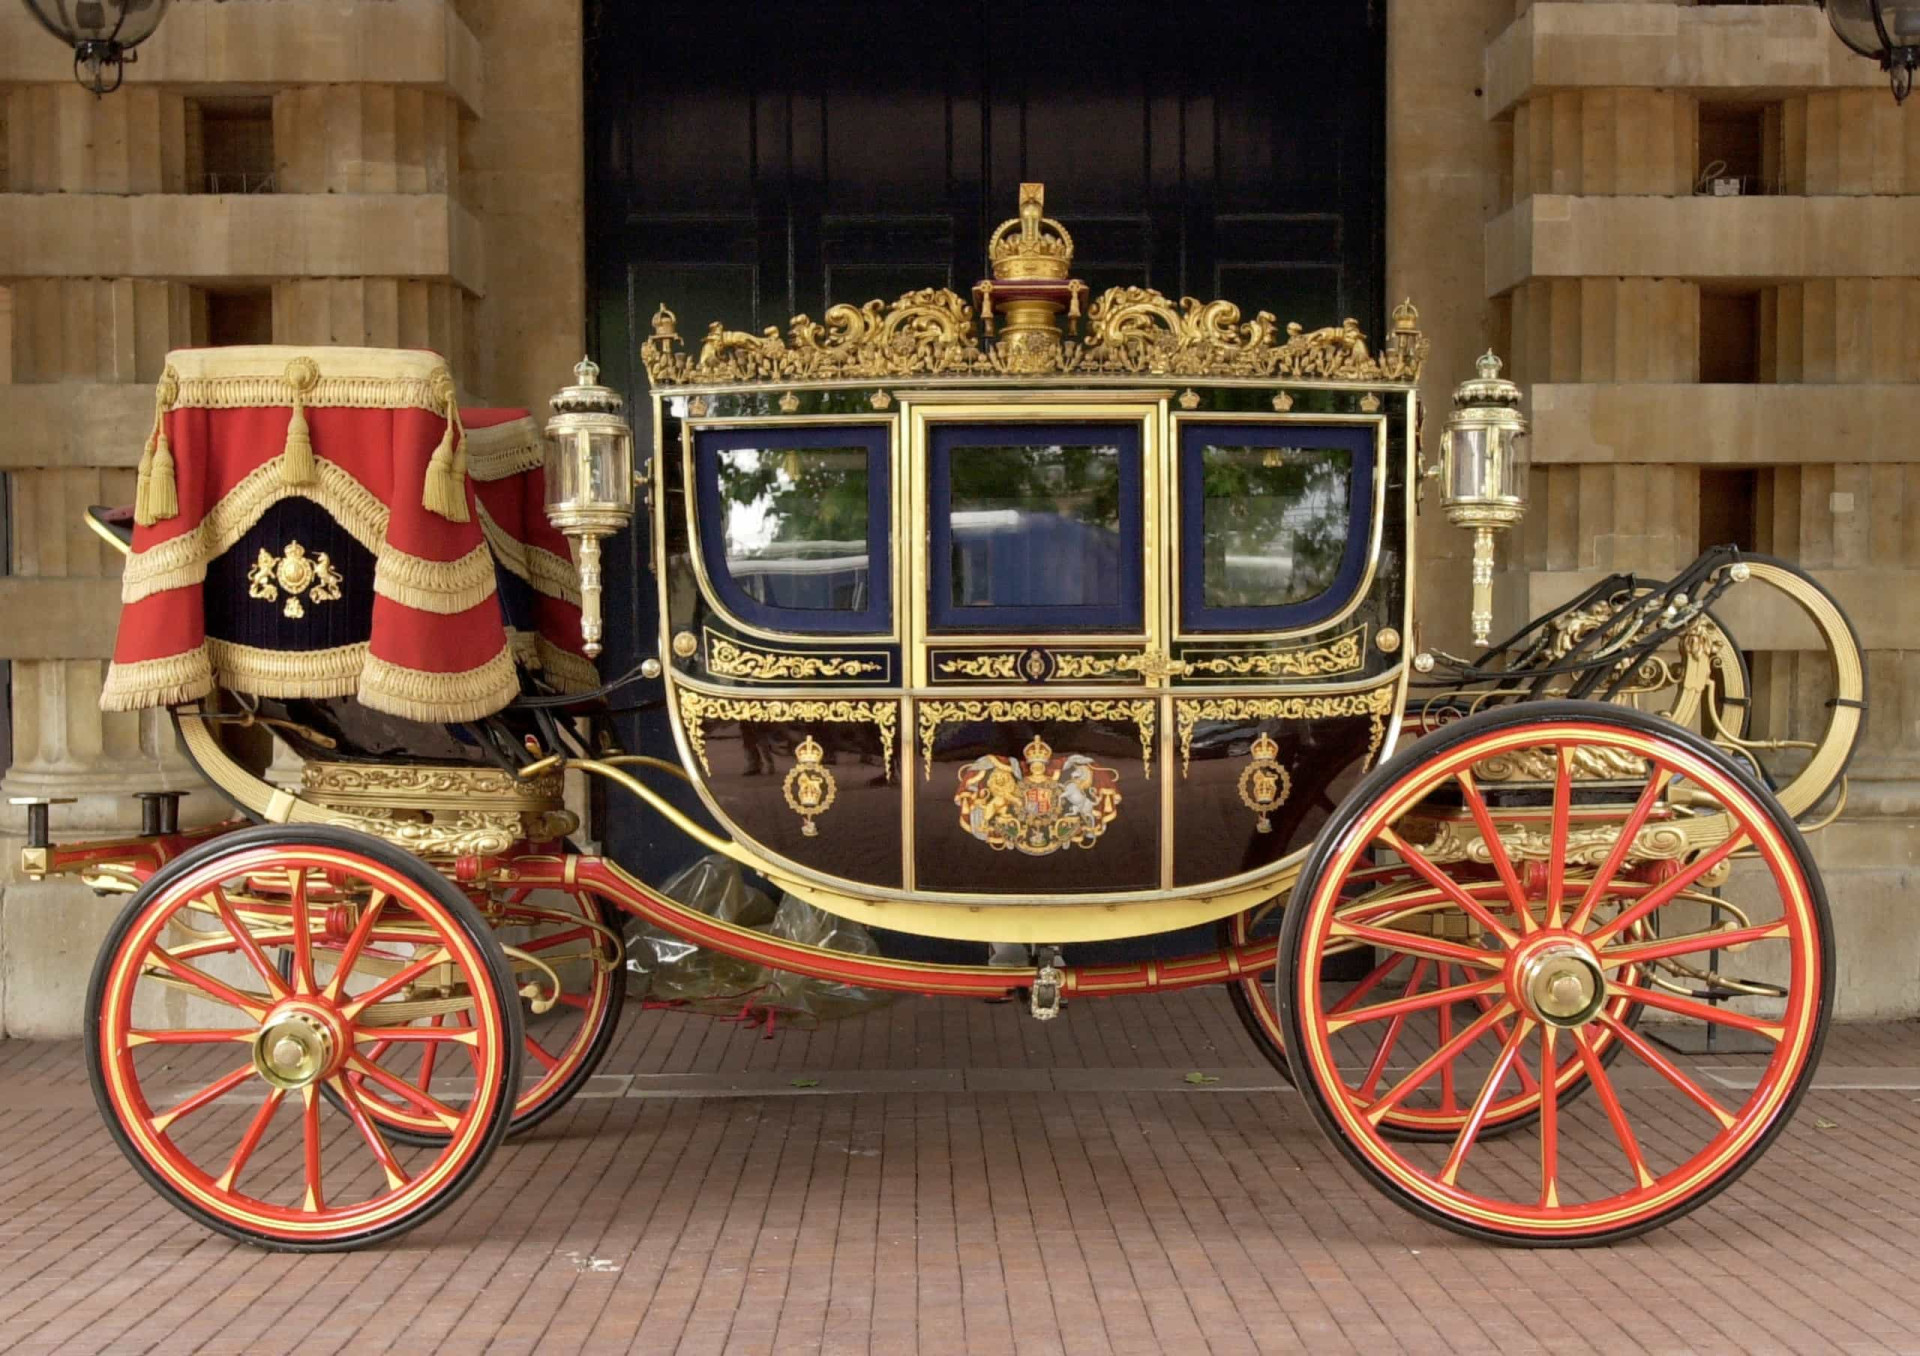 <p>The Irish State Coach is the traditional enclosed horse-drawn coach in which the British monarch travels from Buckingham Palace to the Palace of Westminster for the State Opening of Parliament.</p><p><a href="https://www.msn.com/en-us/community/channel/vid-7xx8mnucu55yw63we9va2gwr7uihbxwc68fxqp25x6tg4ftibpra?cvid=94631541bc0f4f89bfd59158d696ad7e">Follow us and access great exclusive content every day</a></p>